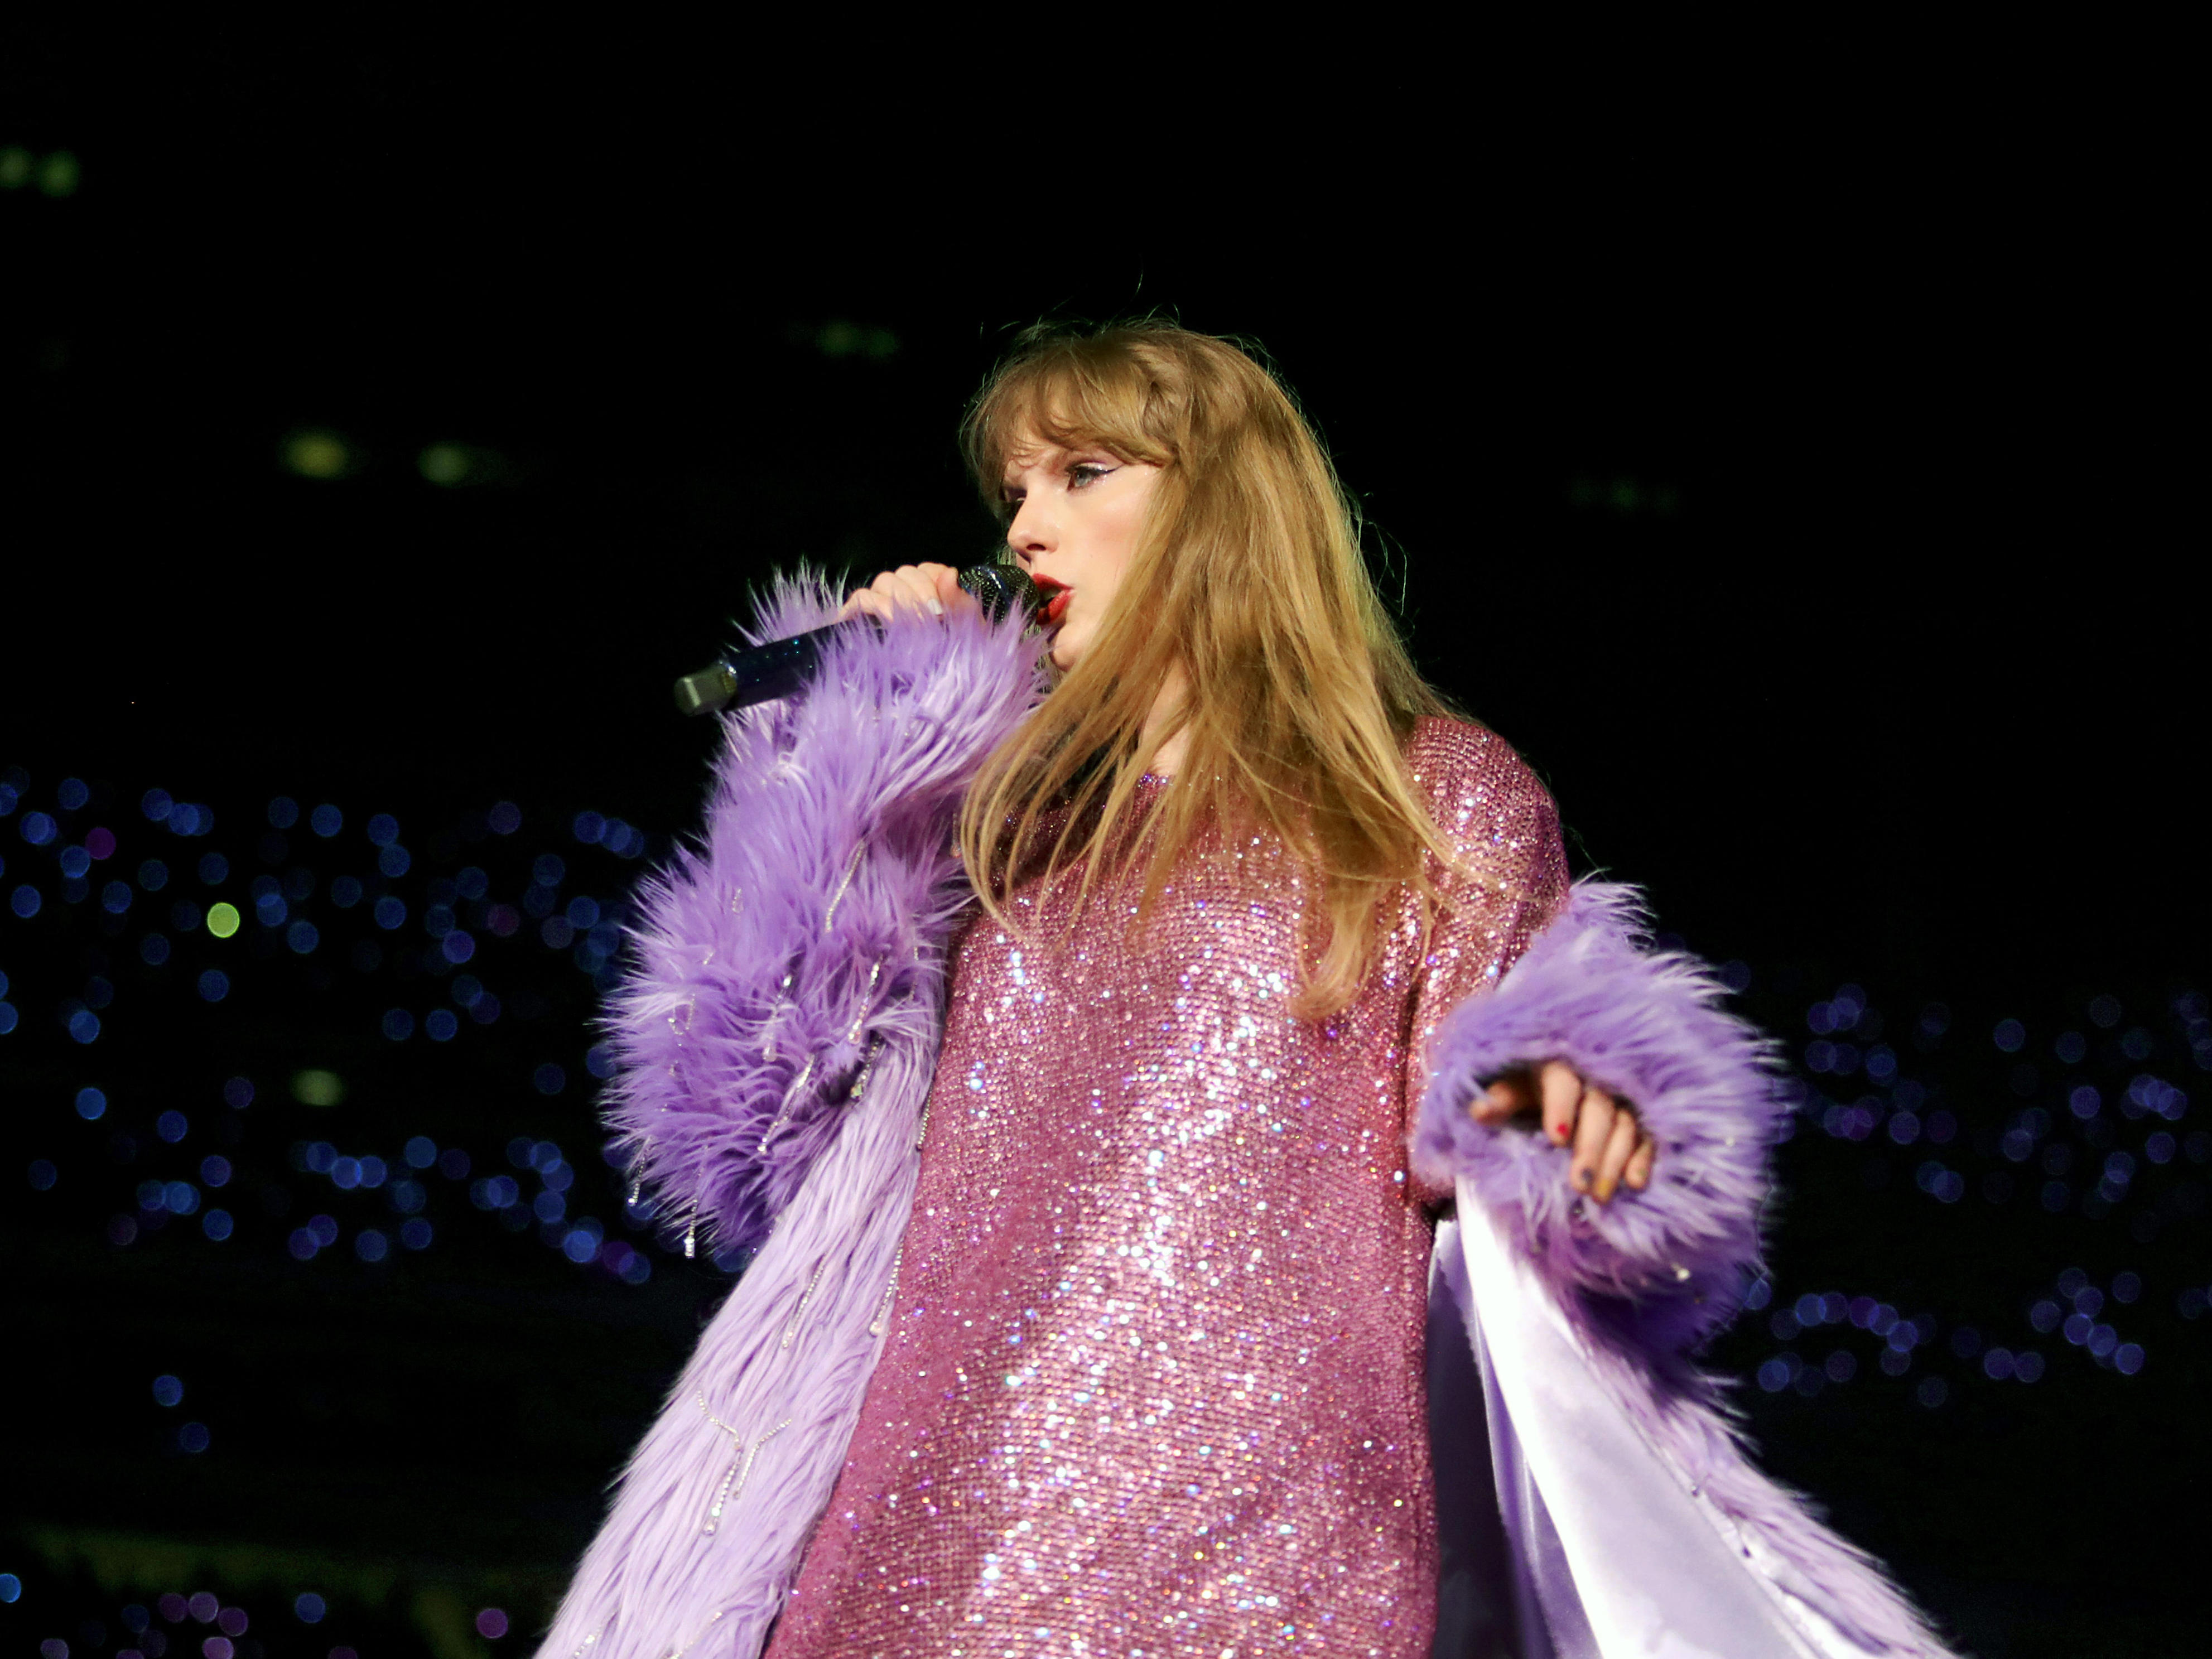 <p>Swift performed "High Fidelity" in Atlanta on April 29. The song <a href="https://www.insider.com/taylor-swift-midnights-lyrics-easter-eggs-2022-10">includes the cryptic lyric</a>, "Do you really wanna know where I was April 29?"</p>